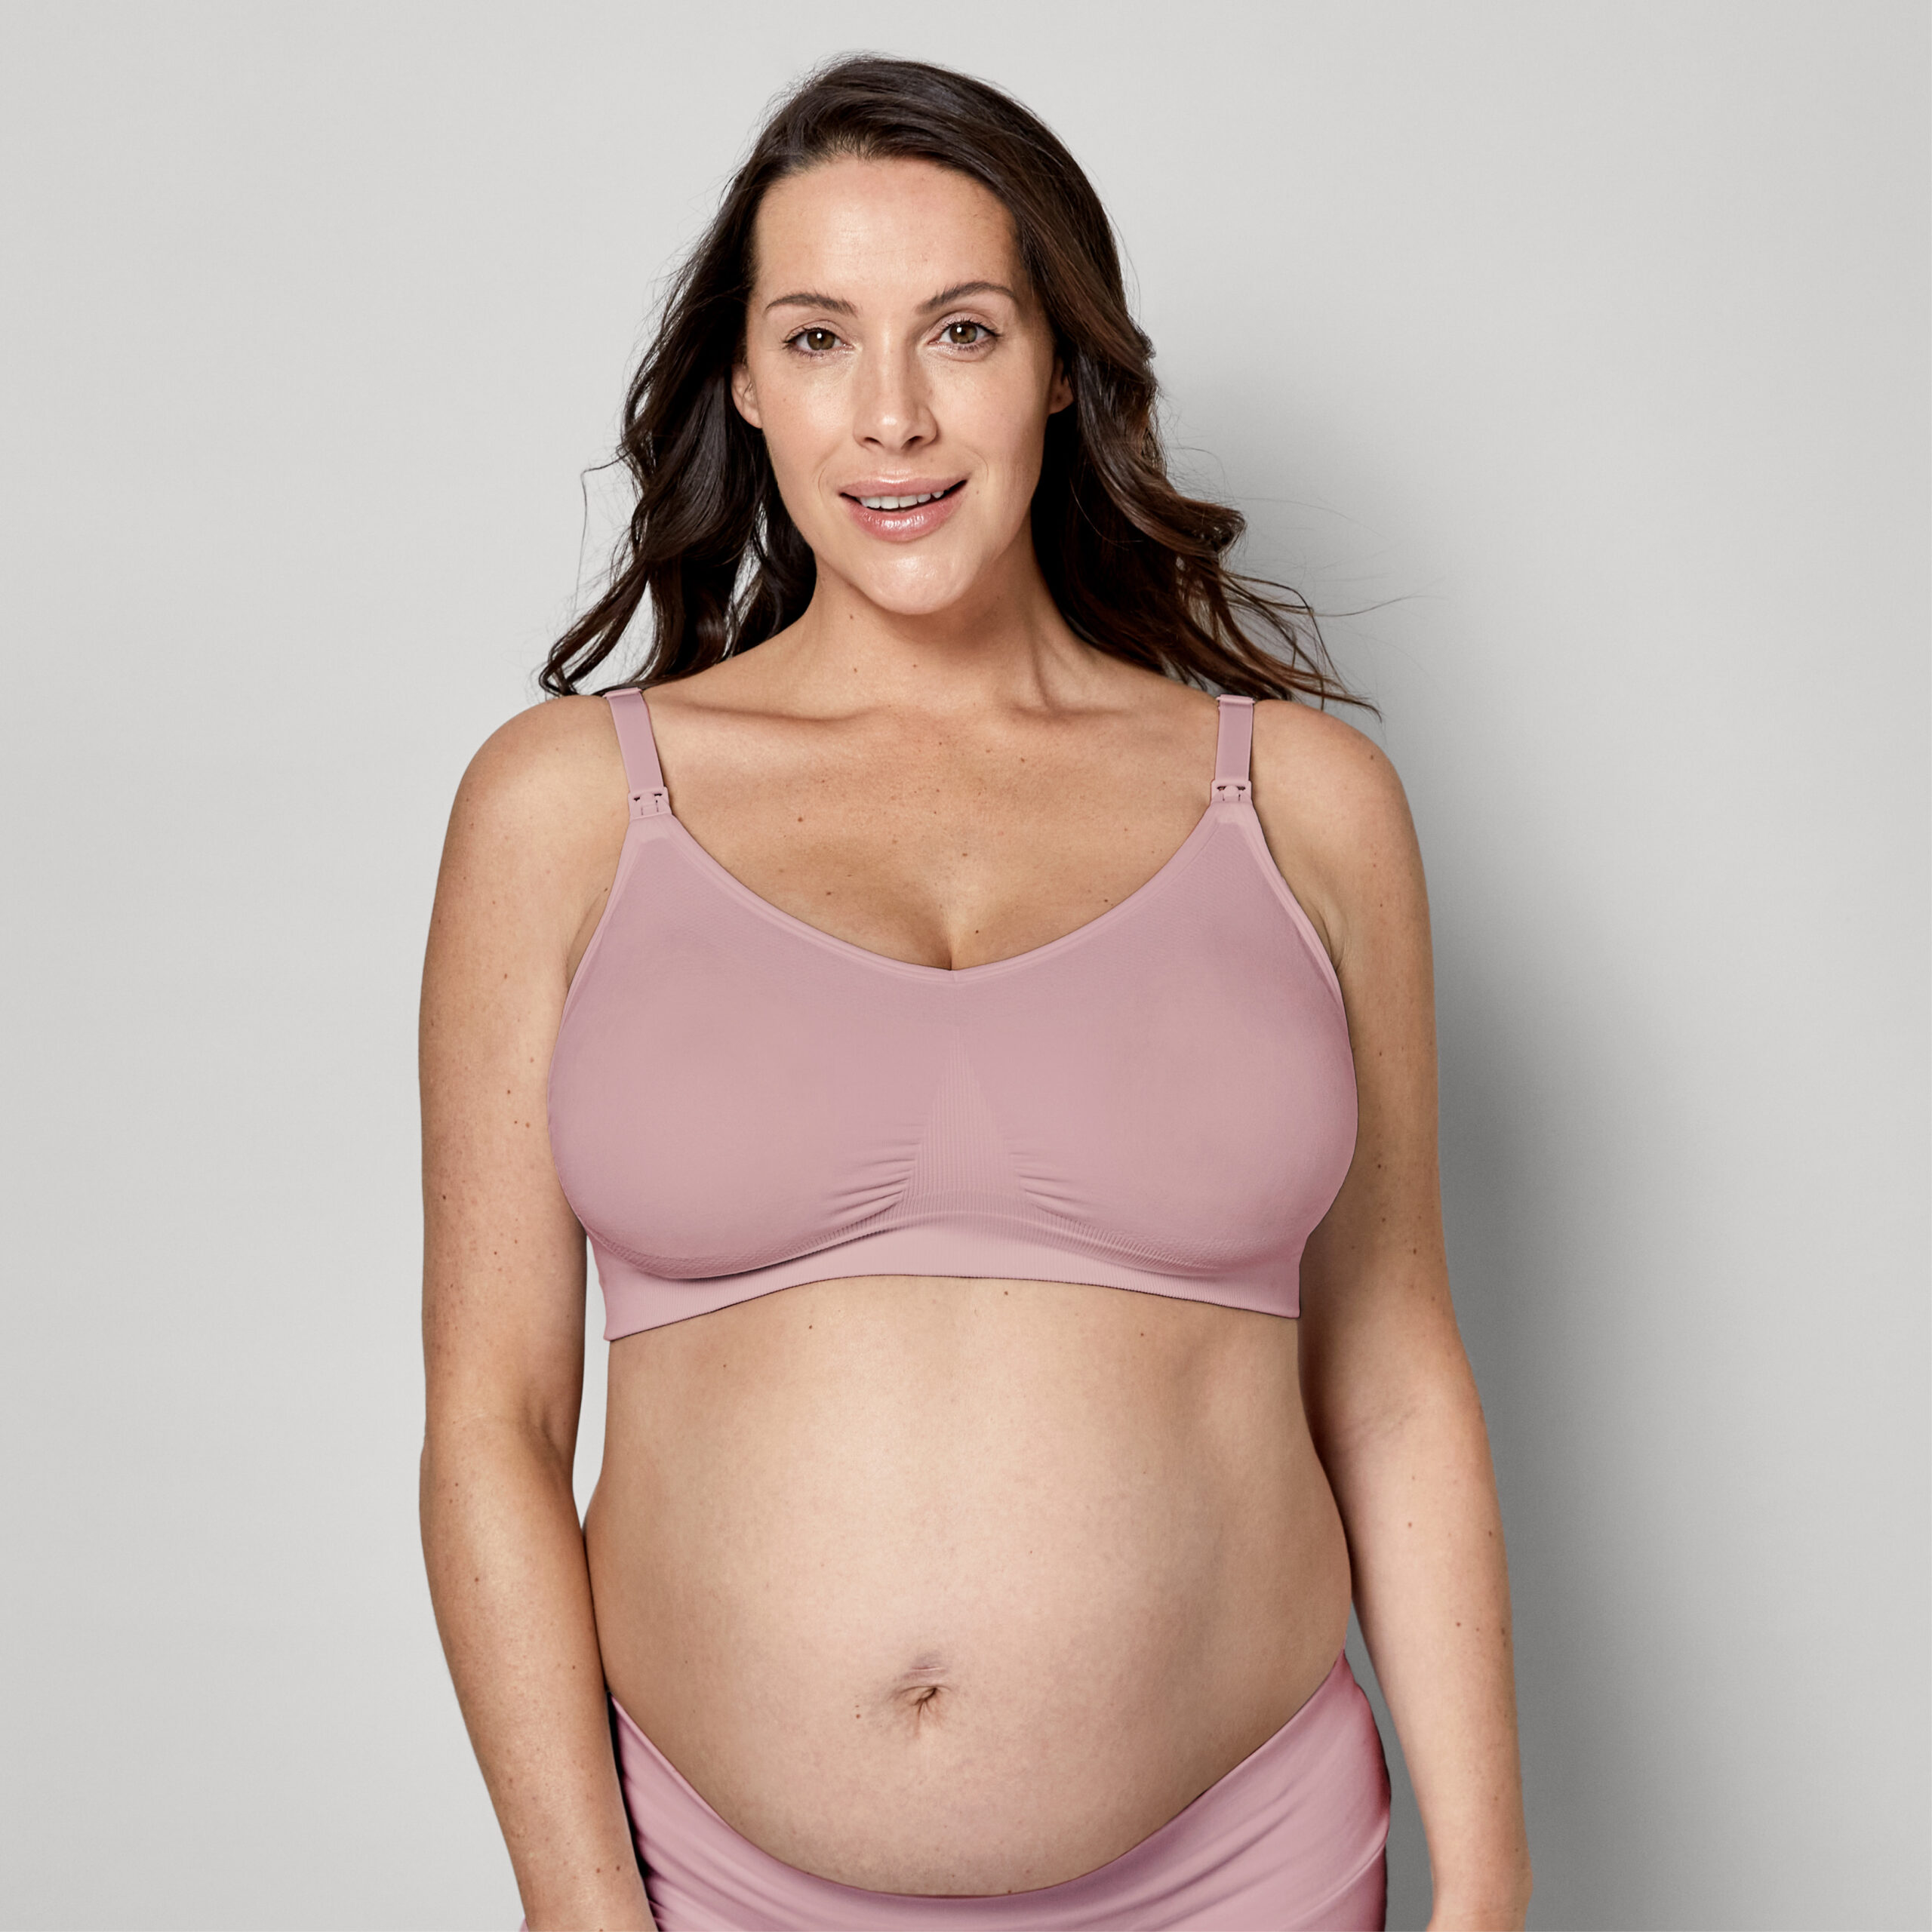 Medela introduces the new Keep Cool™ bras 